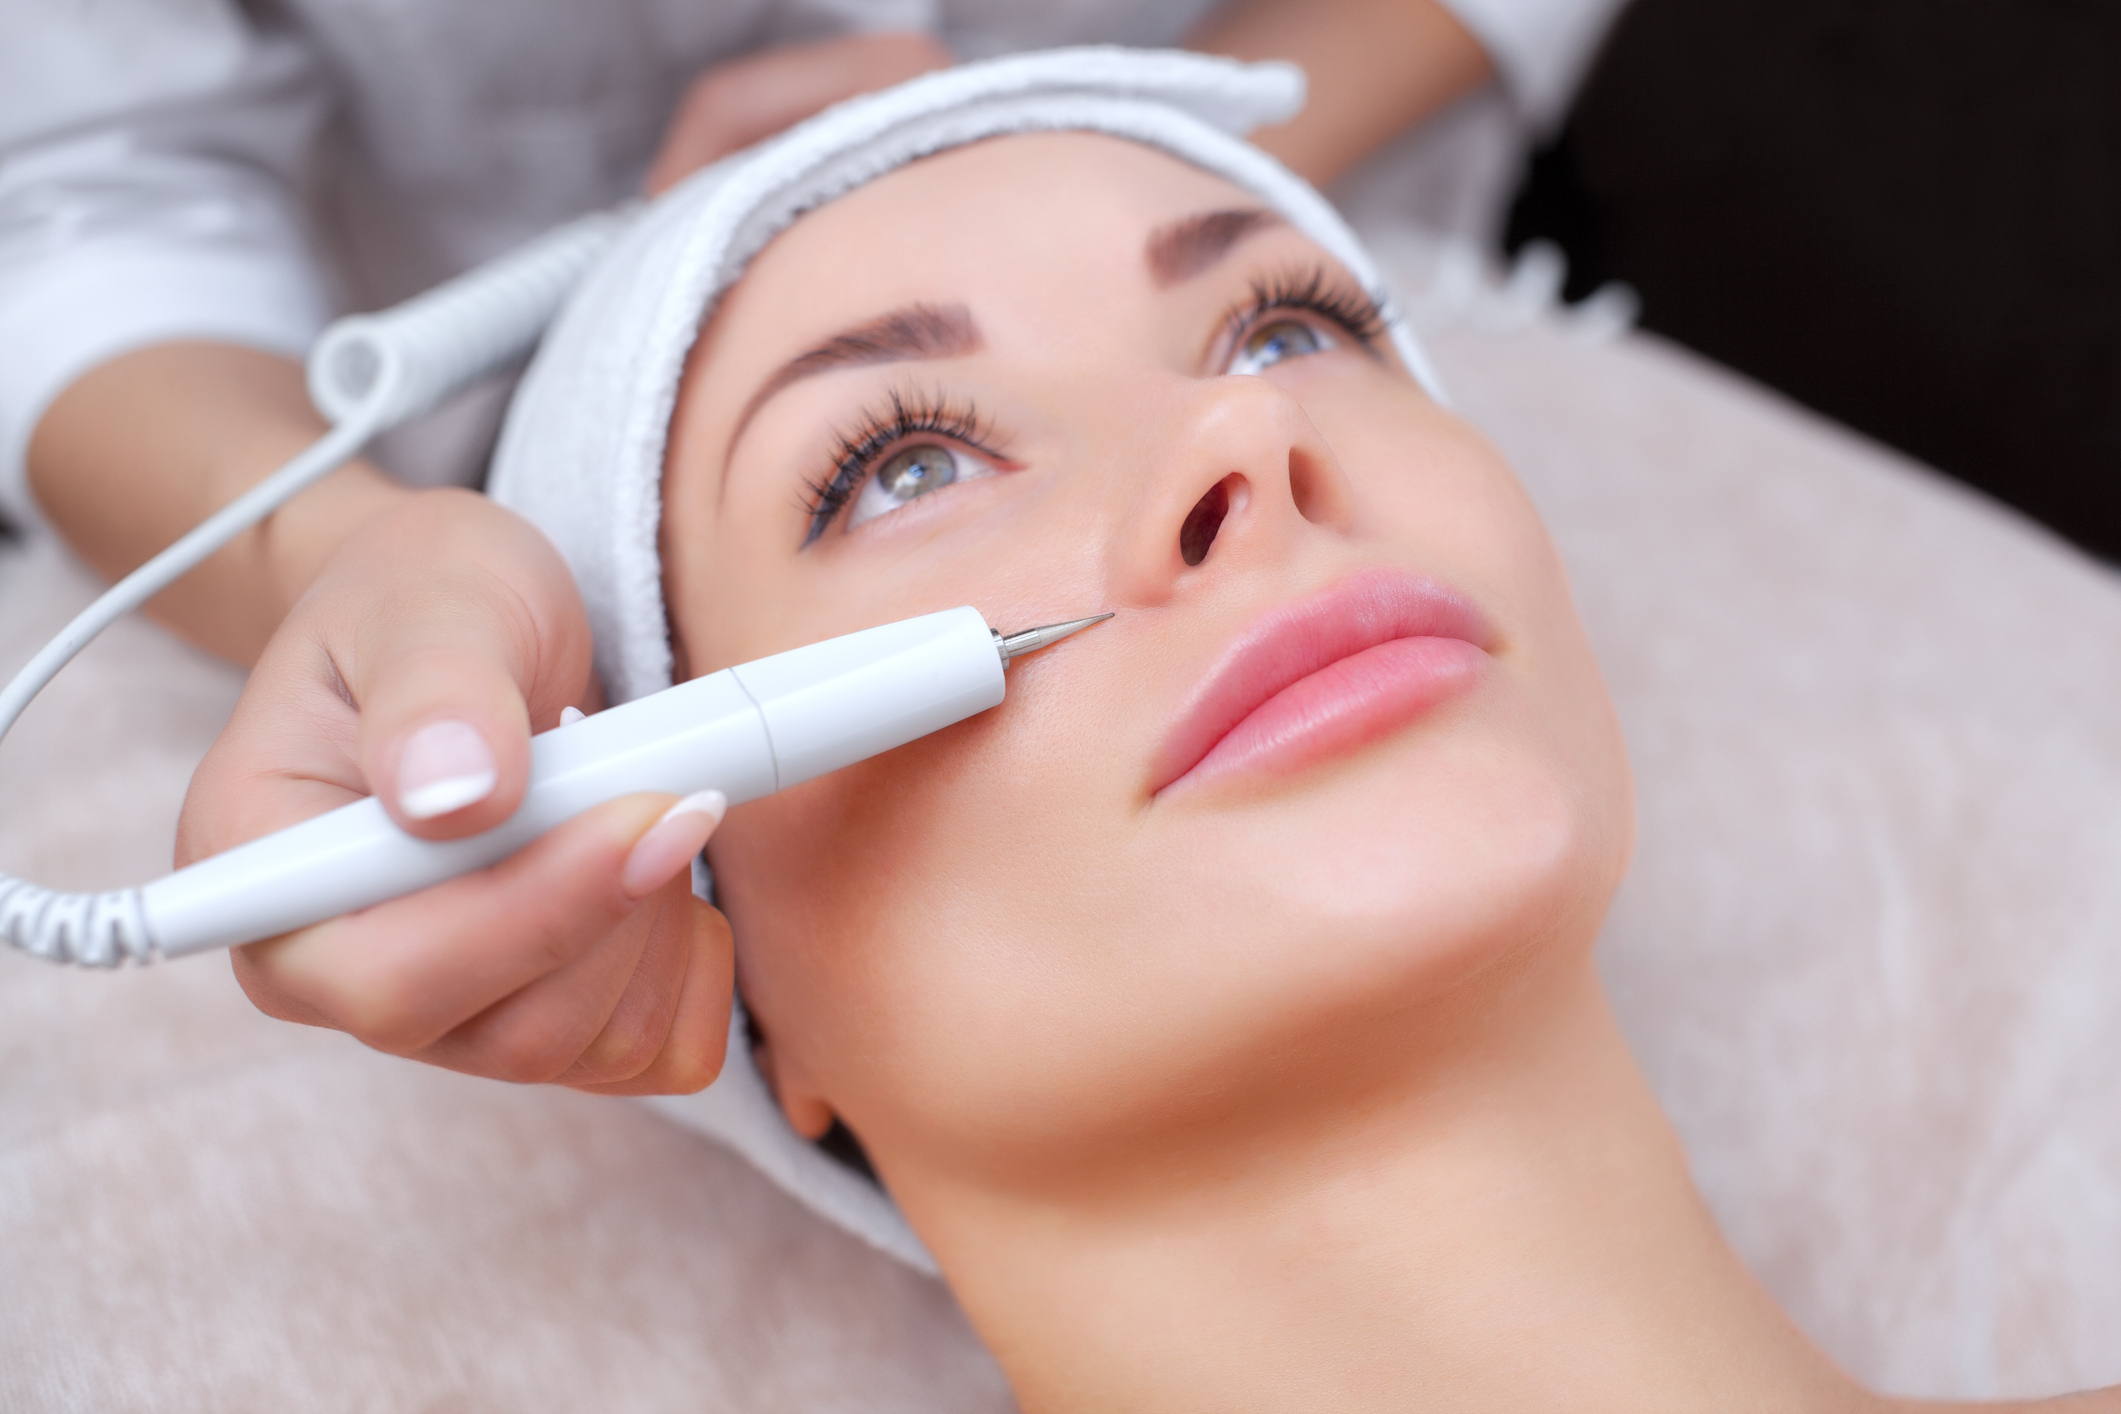 The doctor-cosmetologist makes the procedure treatment of Couperose of the facial skin of a beautiful, young woman in a beauty salon.Cosmetology and professional skin care.